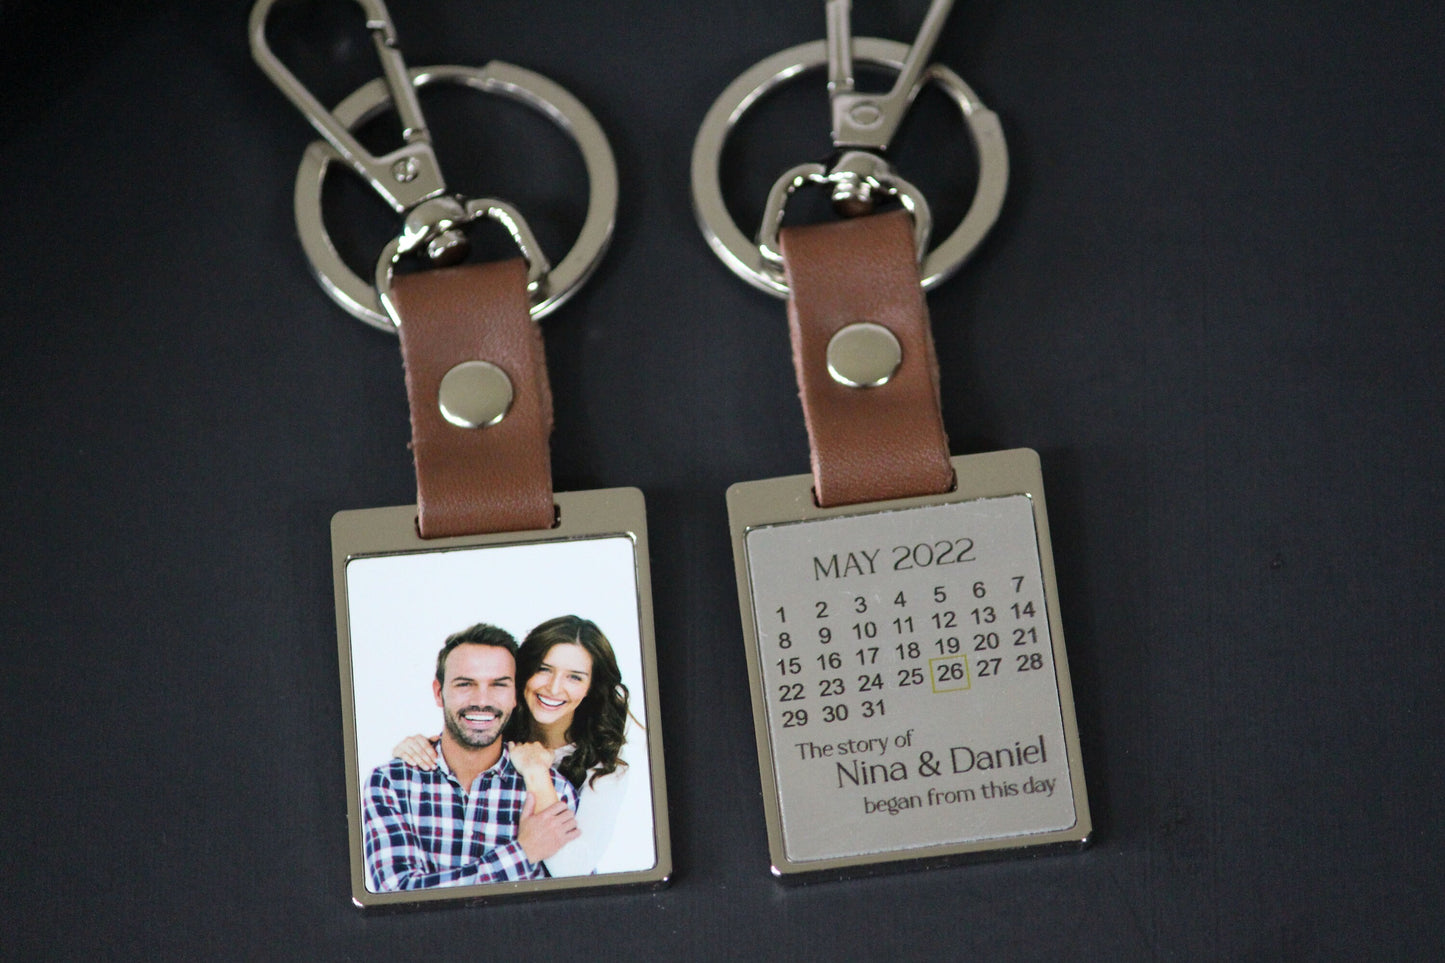 Father's Day Gifts, Personalized Leather Multi Photo Keychain, Drive Safe, First Time Dad Mom Gift - Birthday, Anniversary Calendar Date